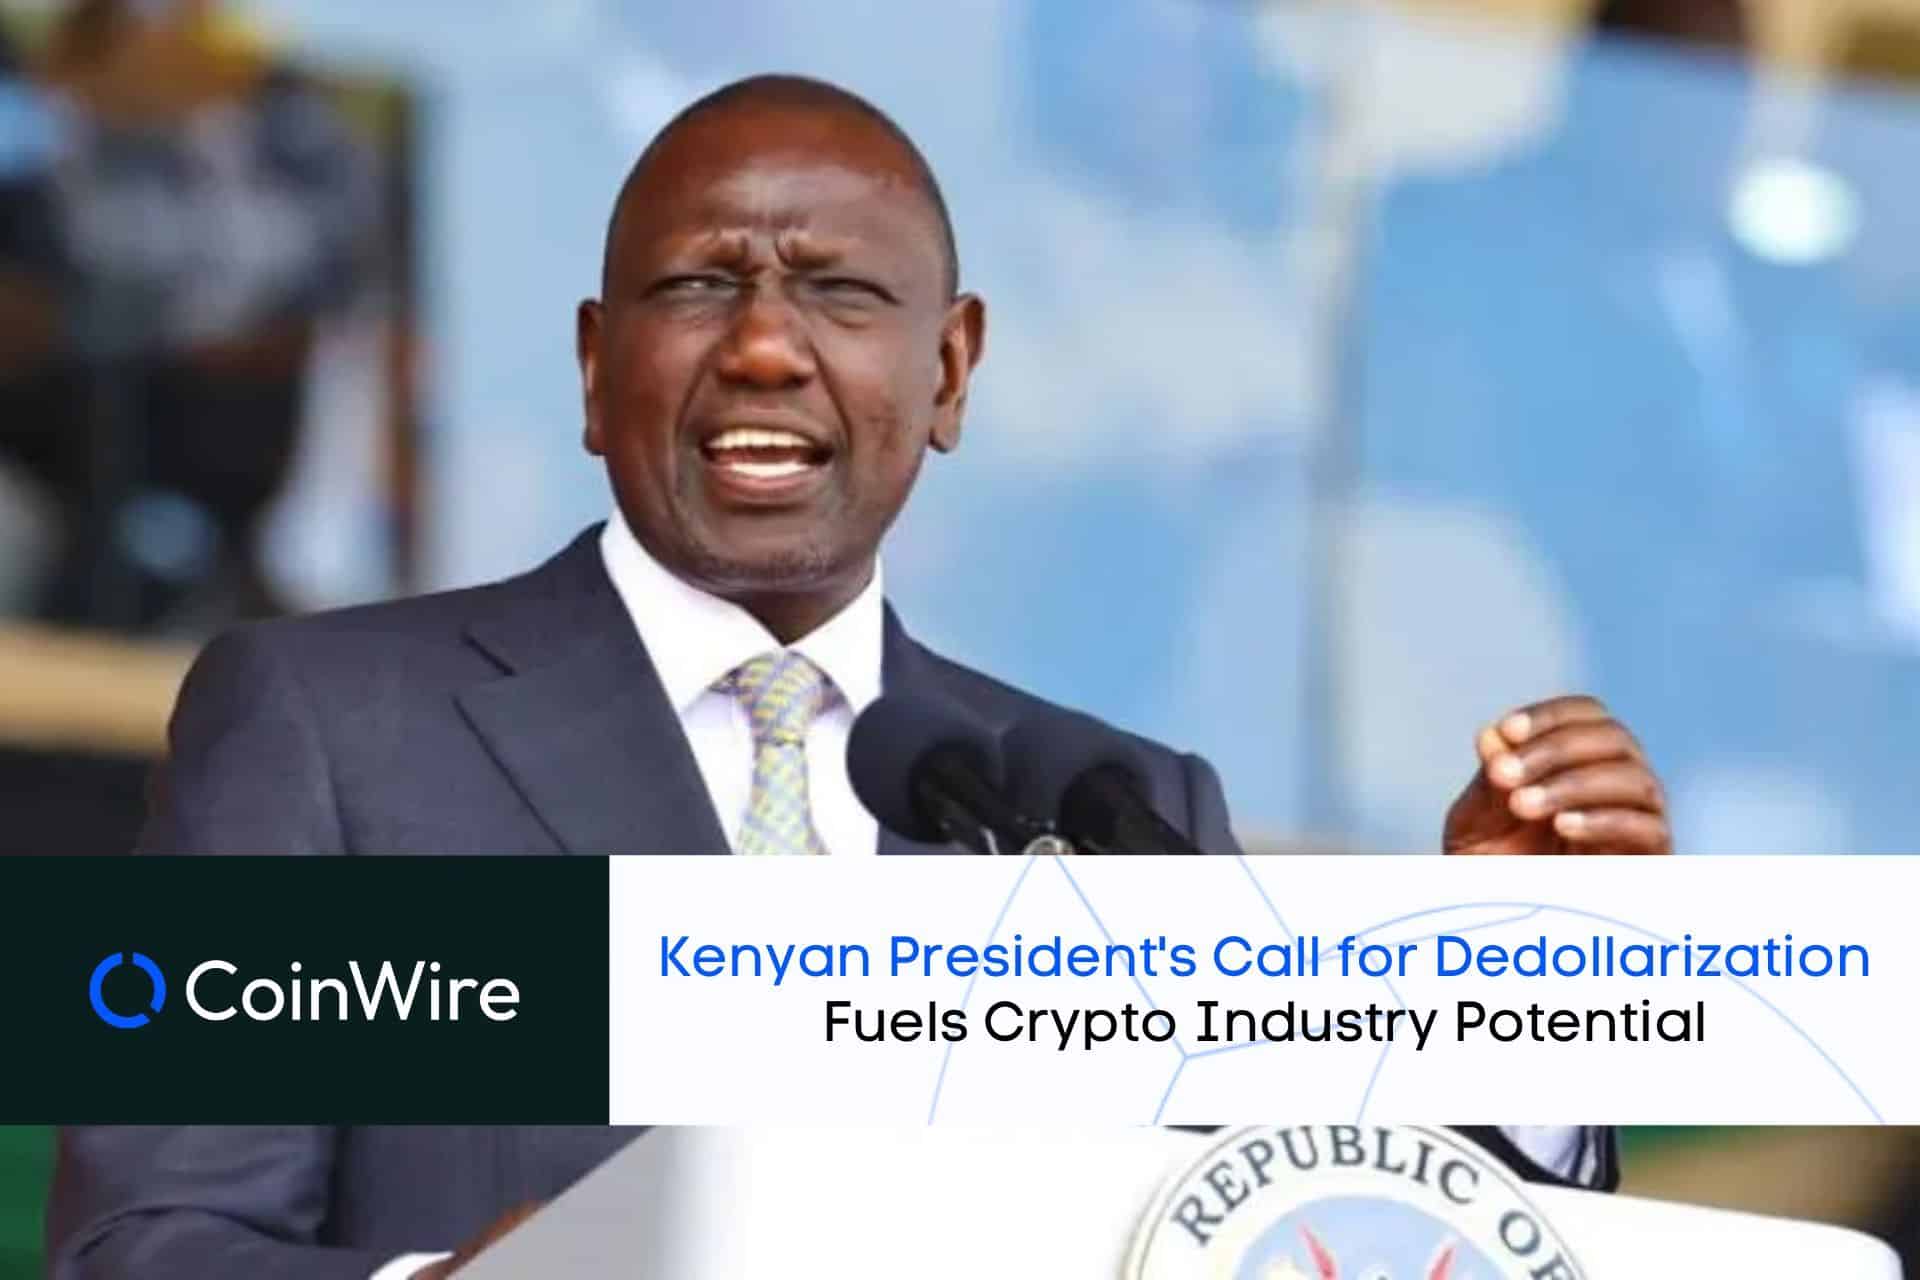 Kenyan President William Ruto'S Calls For Dedollarization Fuels Crypto Industry Potential